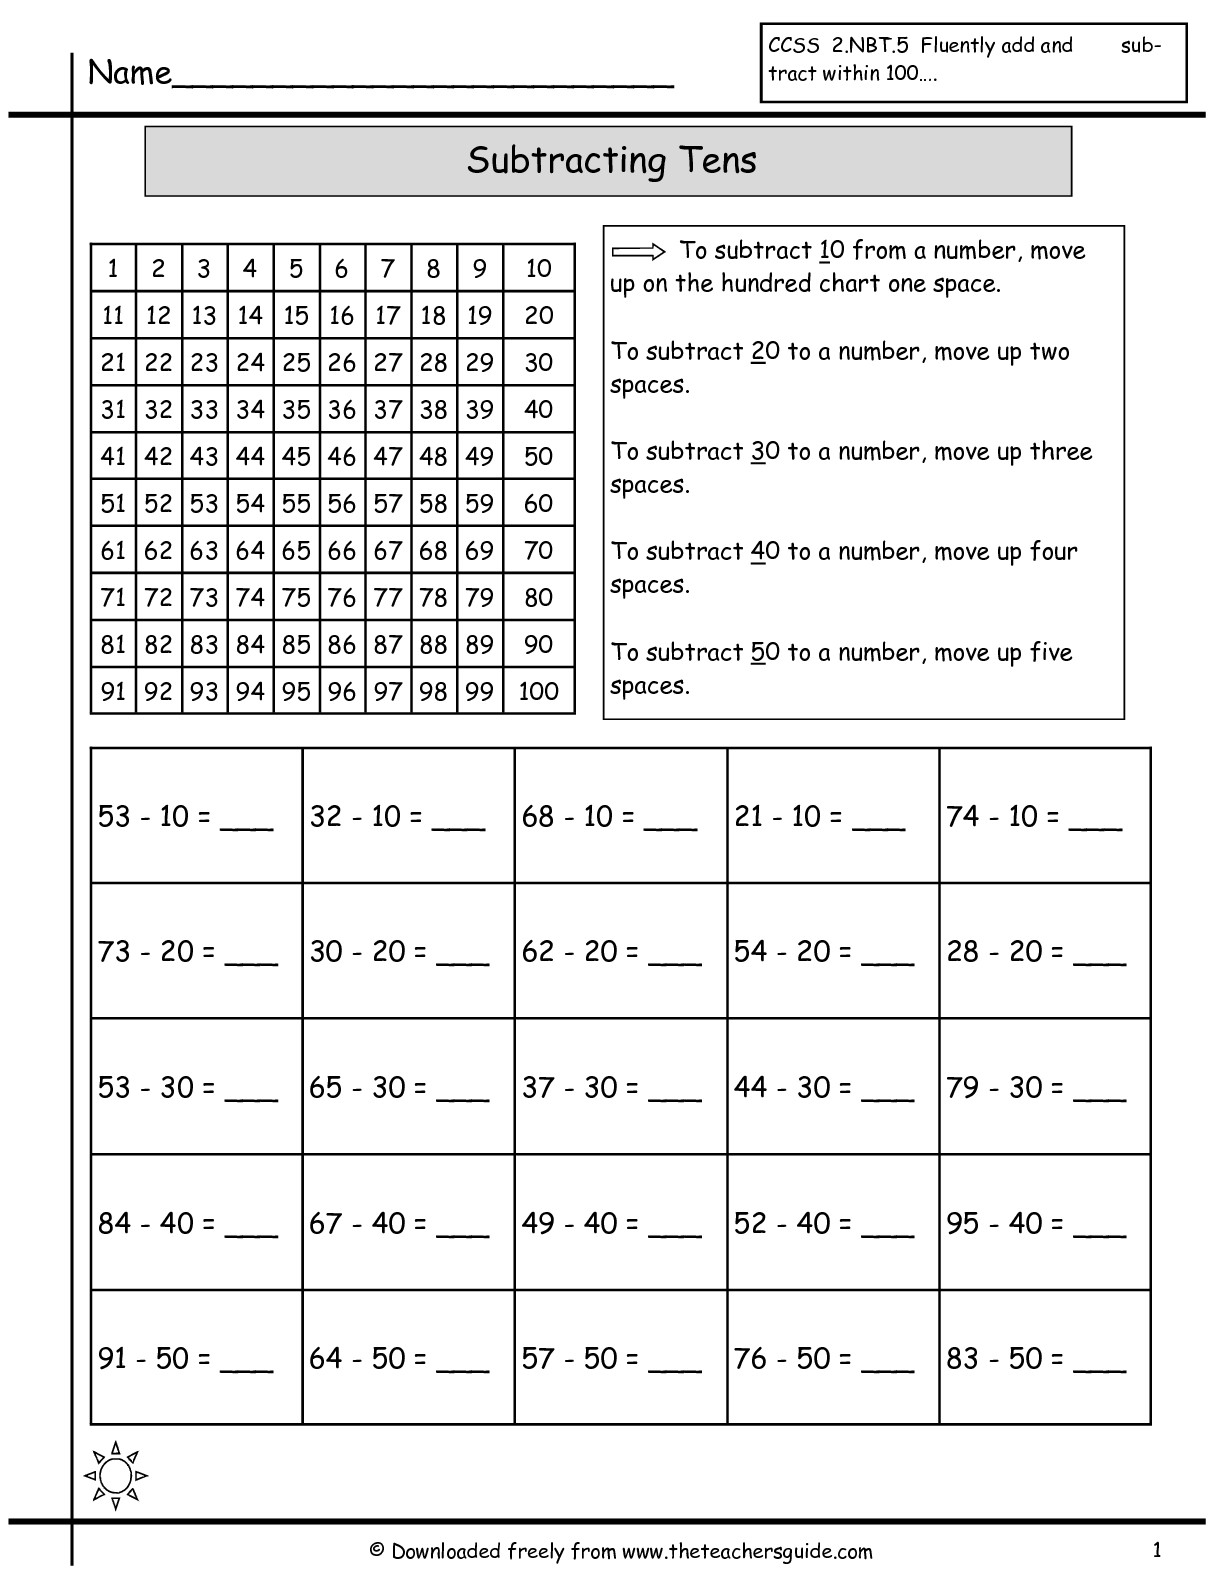 Subtracting On a Hundreds Chart Worksheets Image